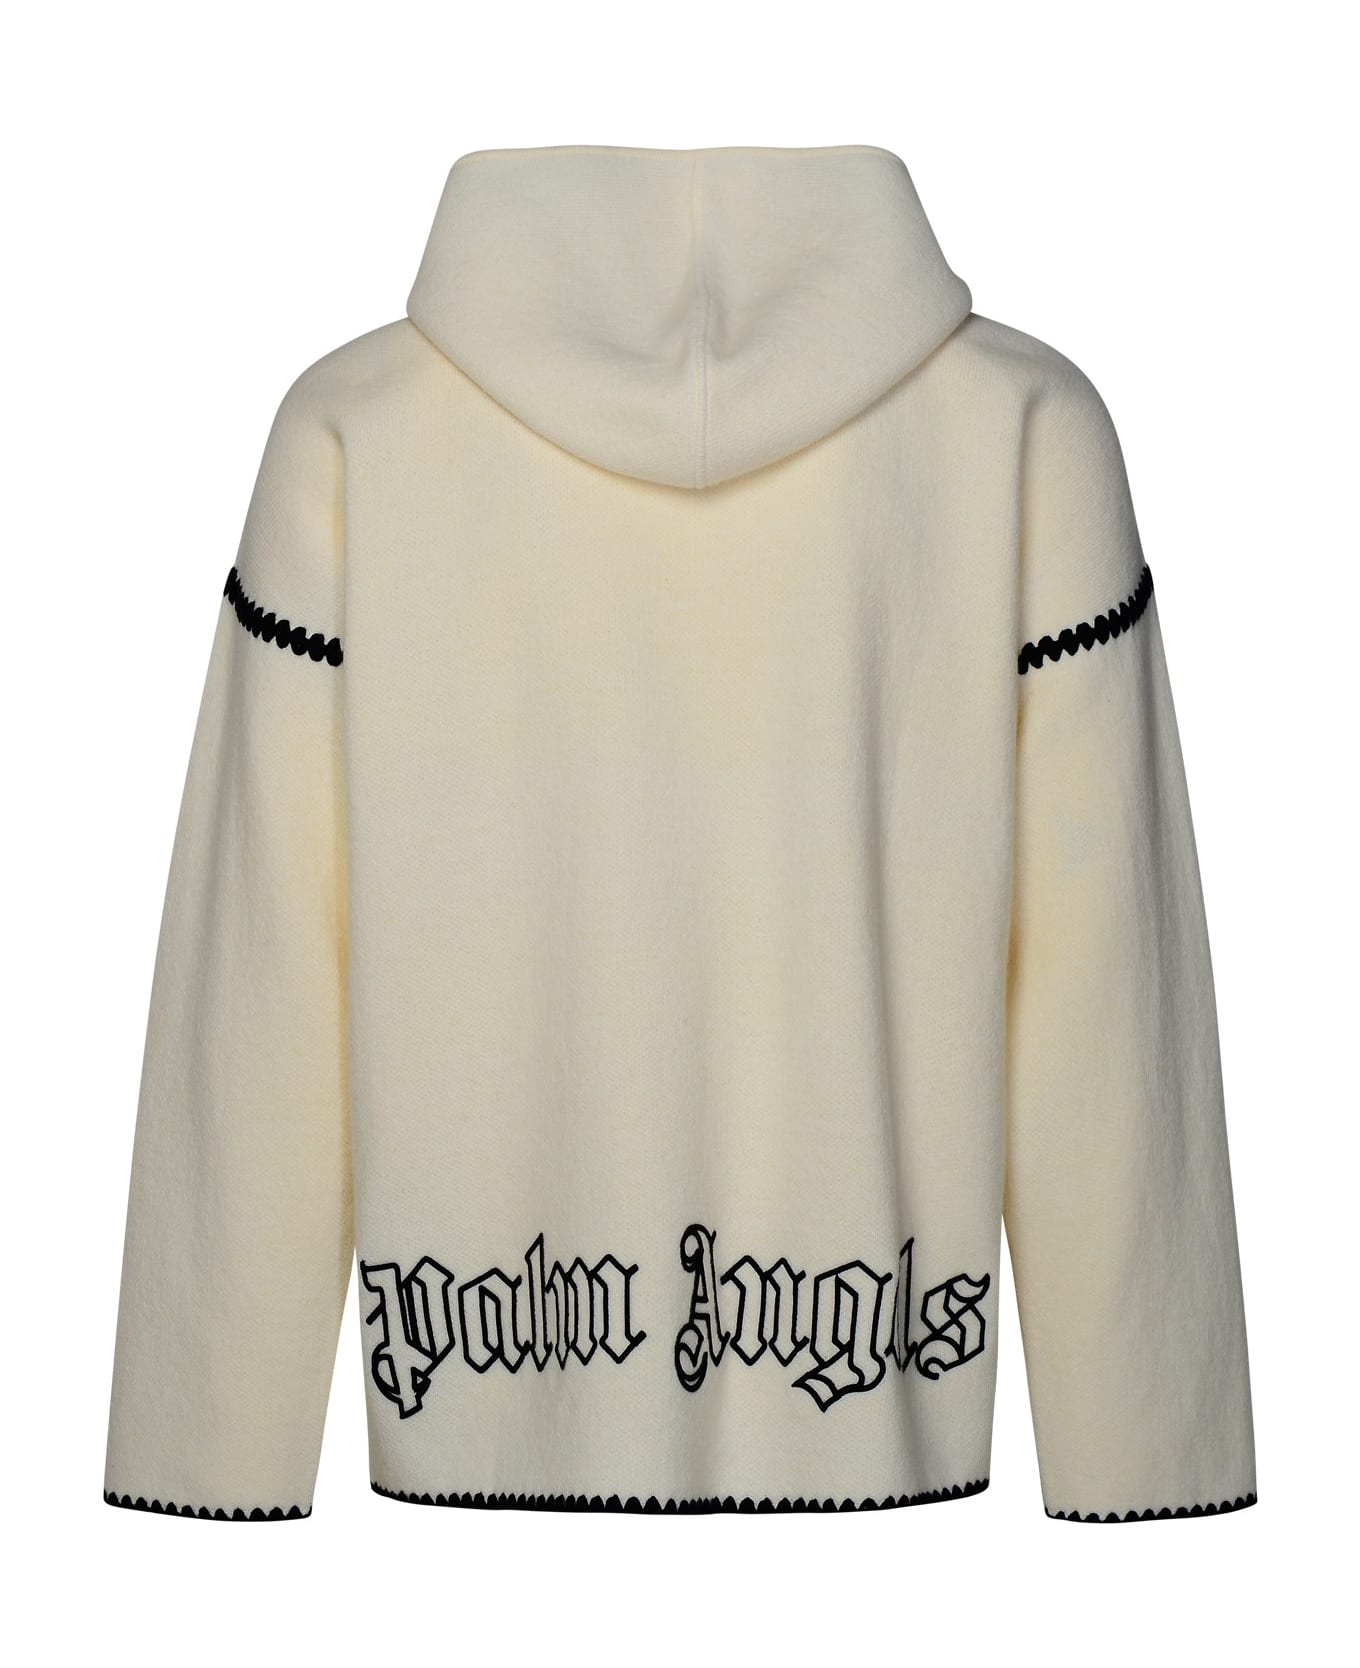 Palm Angels Wool Blend Sweater - White